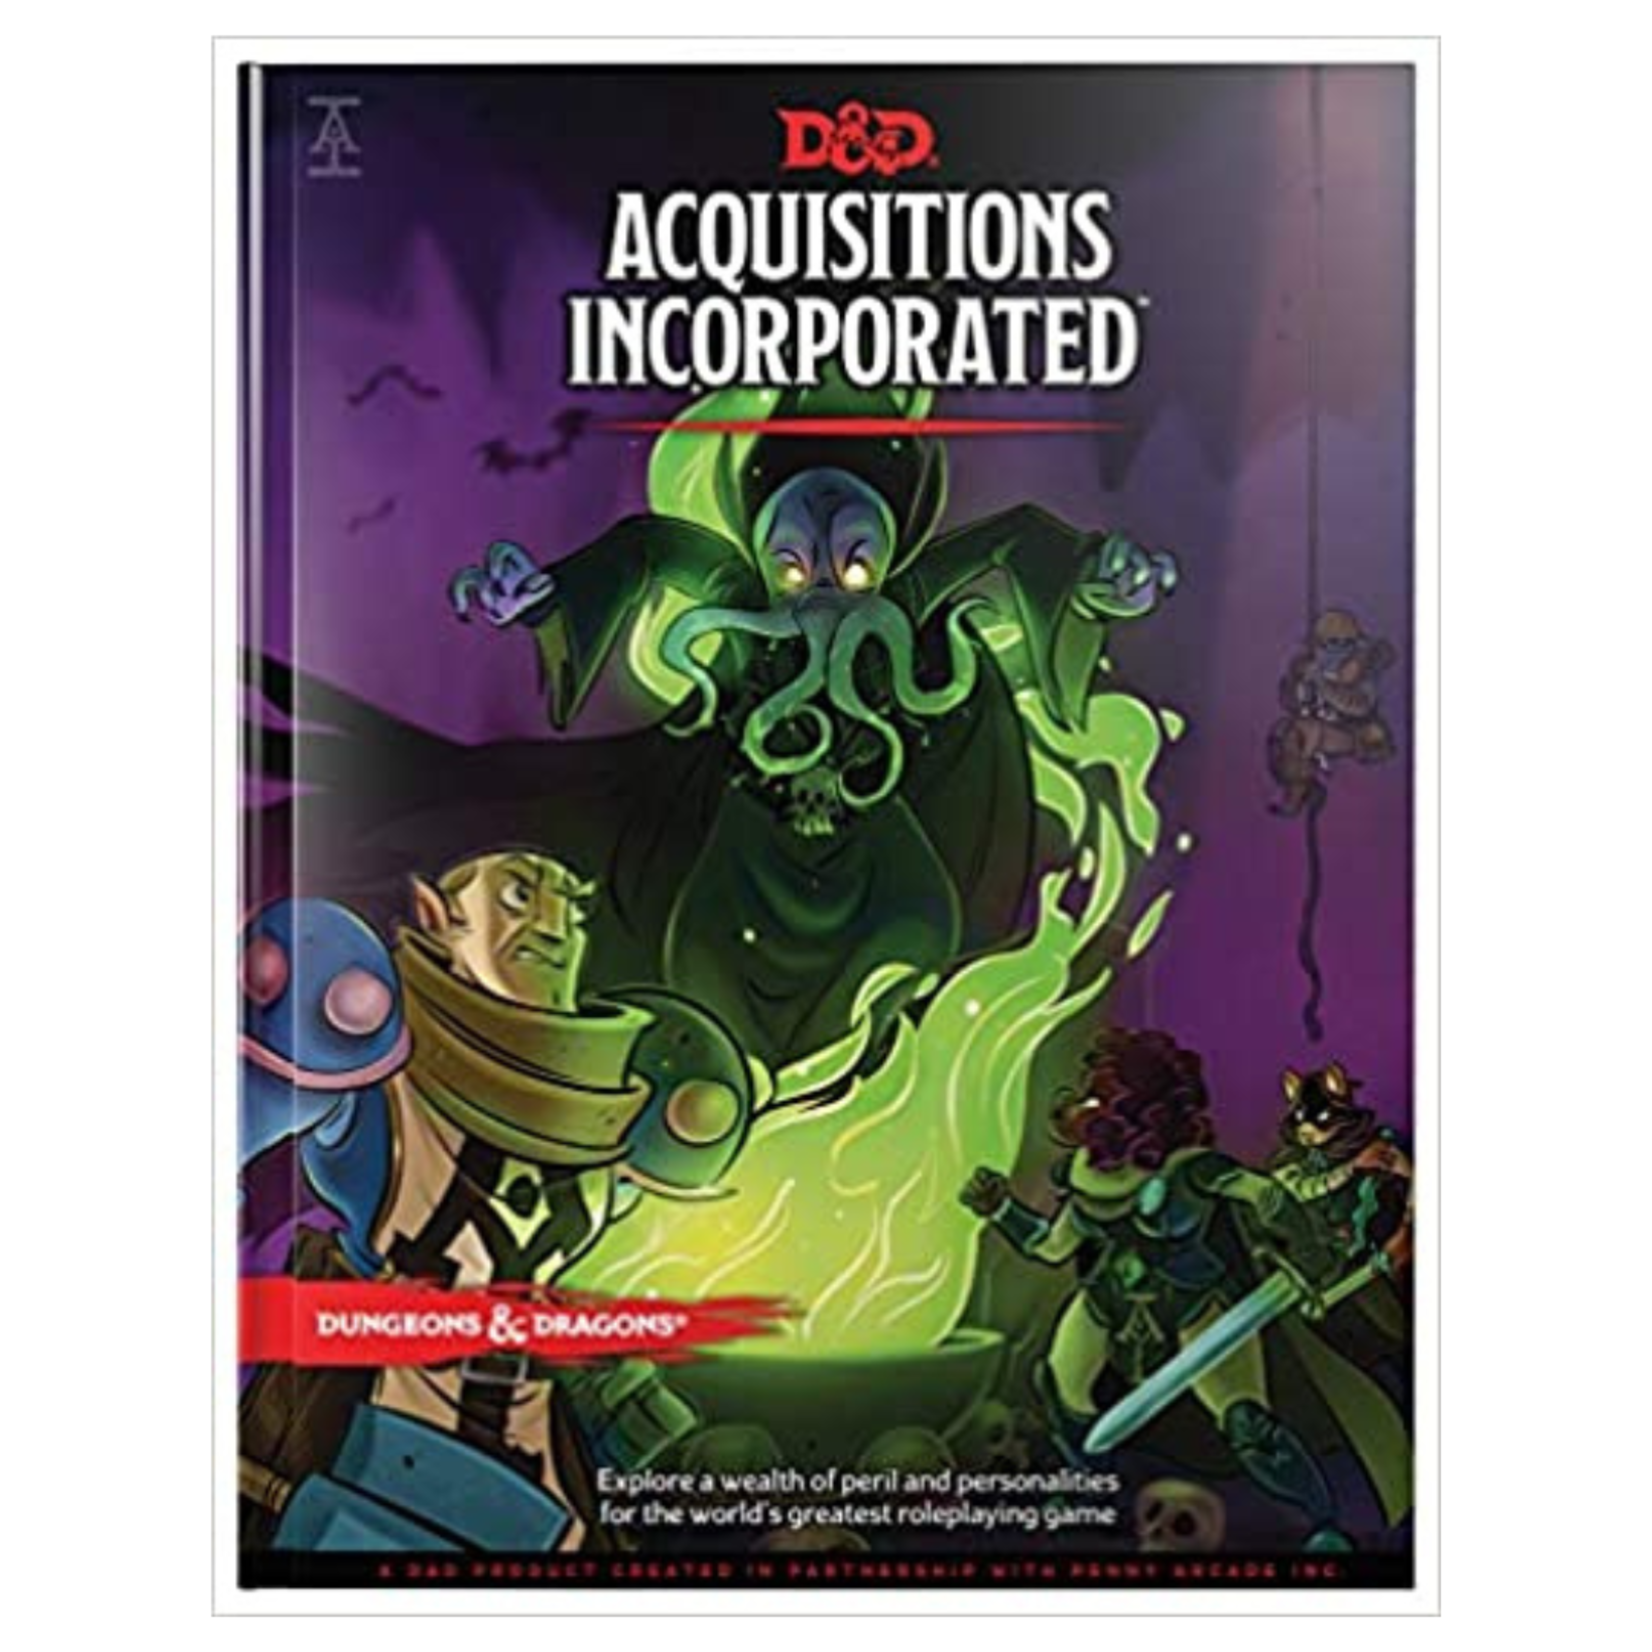 Book - Acquisitions Incorporated